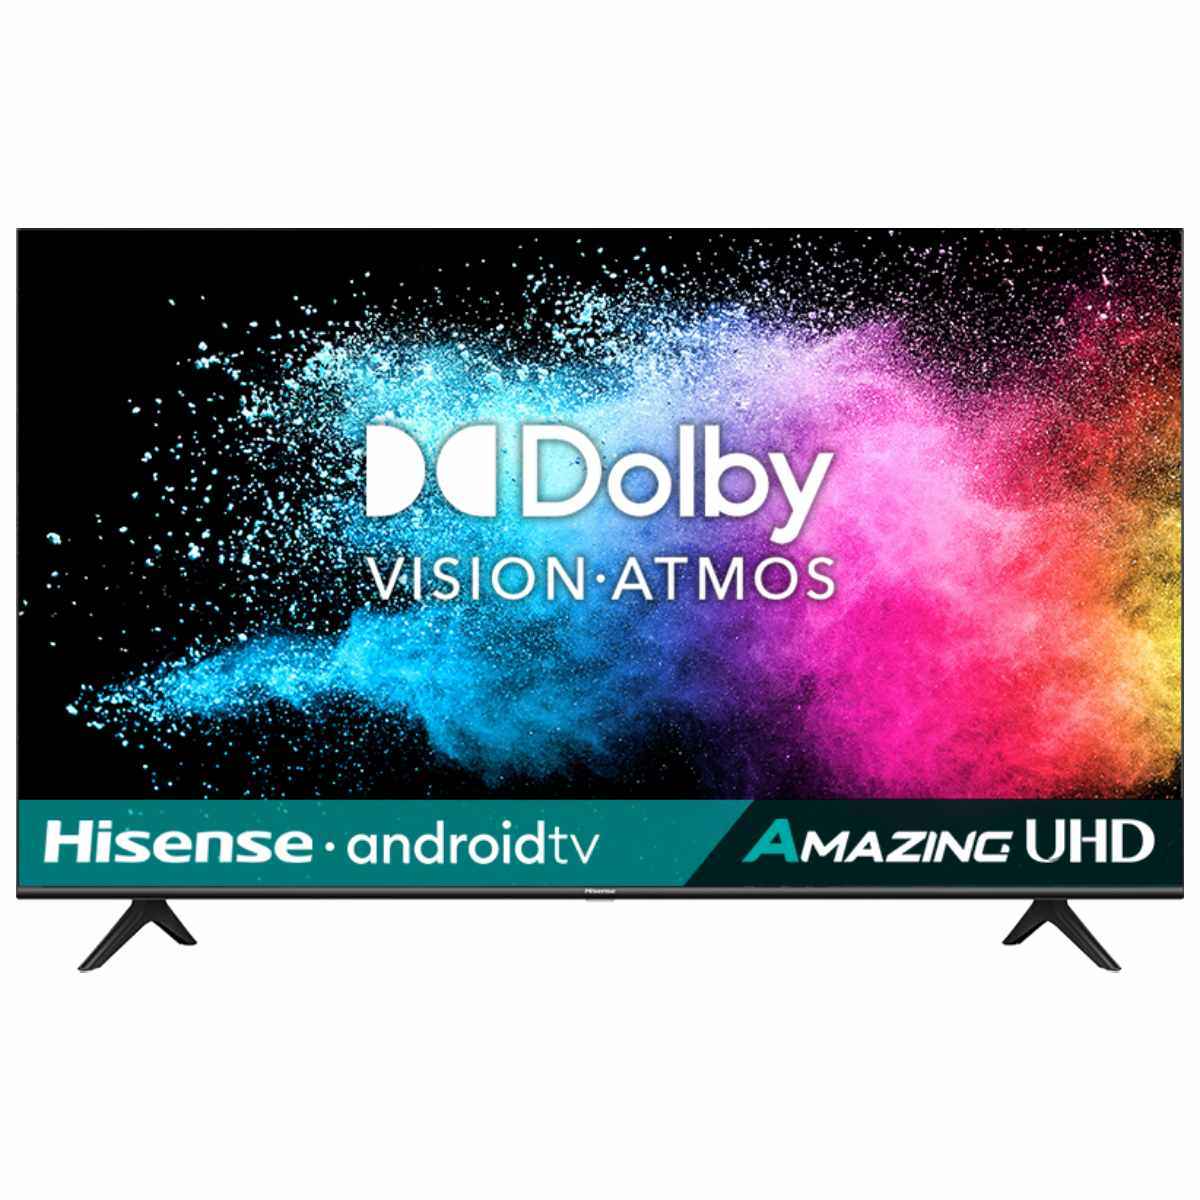 Hisense 50 inches 4K UHD Android Smart TV (50A71F)